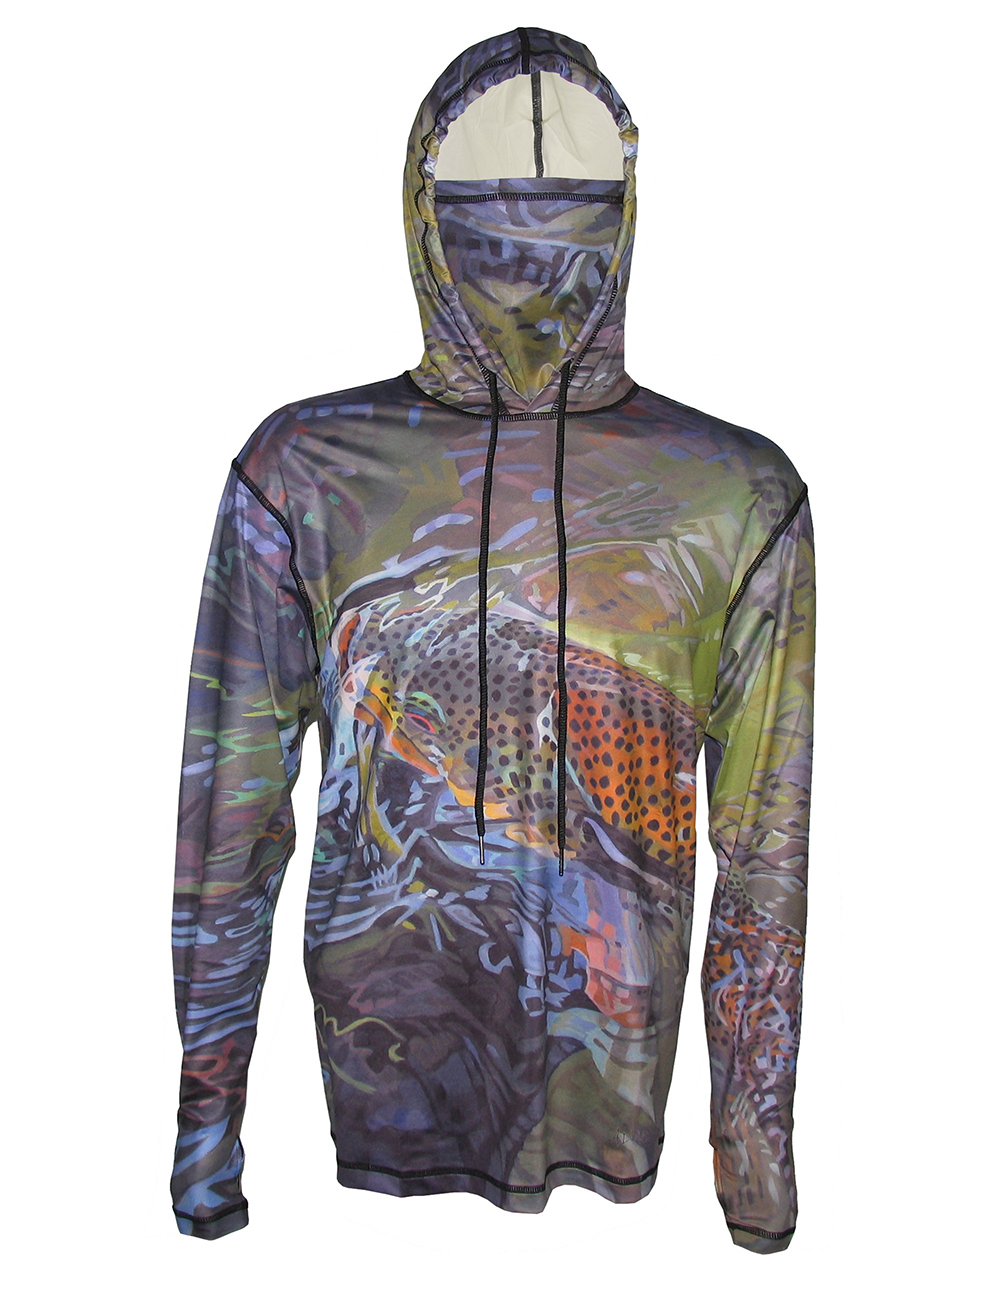 Tranquility Fishing Hoodies • Sun Protection Fly Fishing Apparel